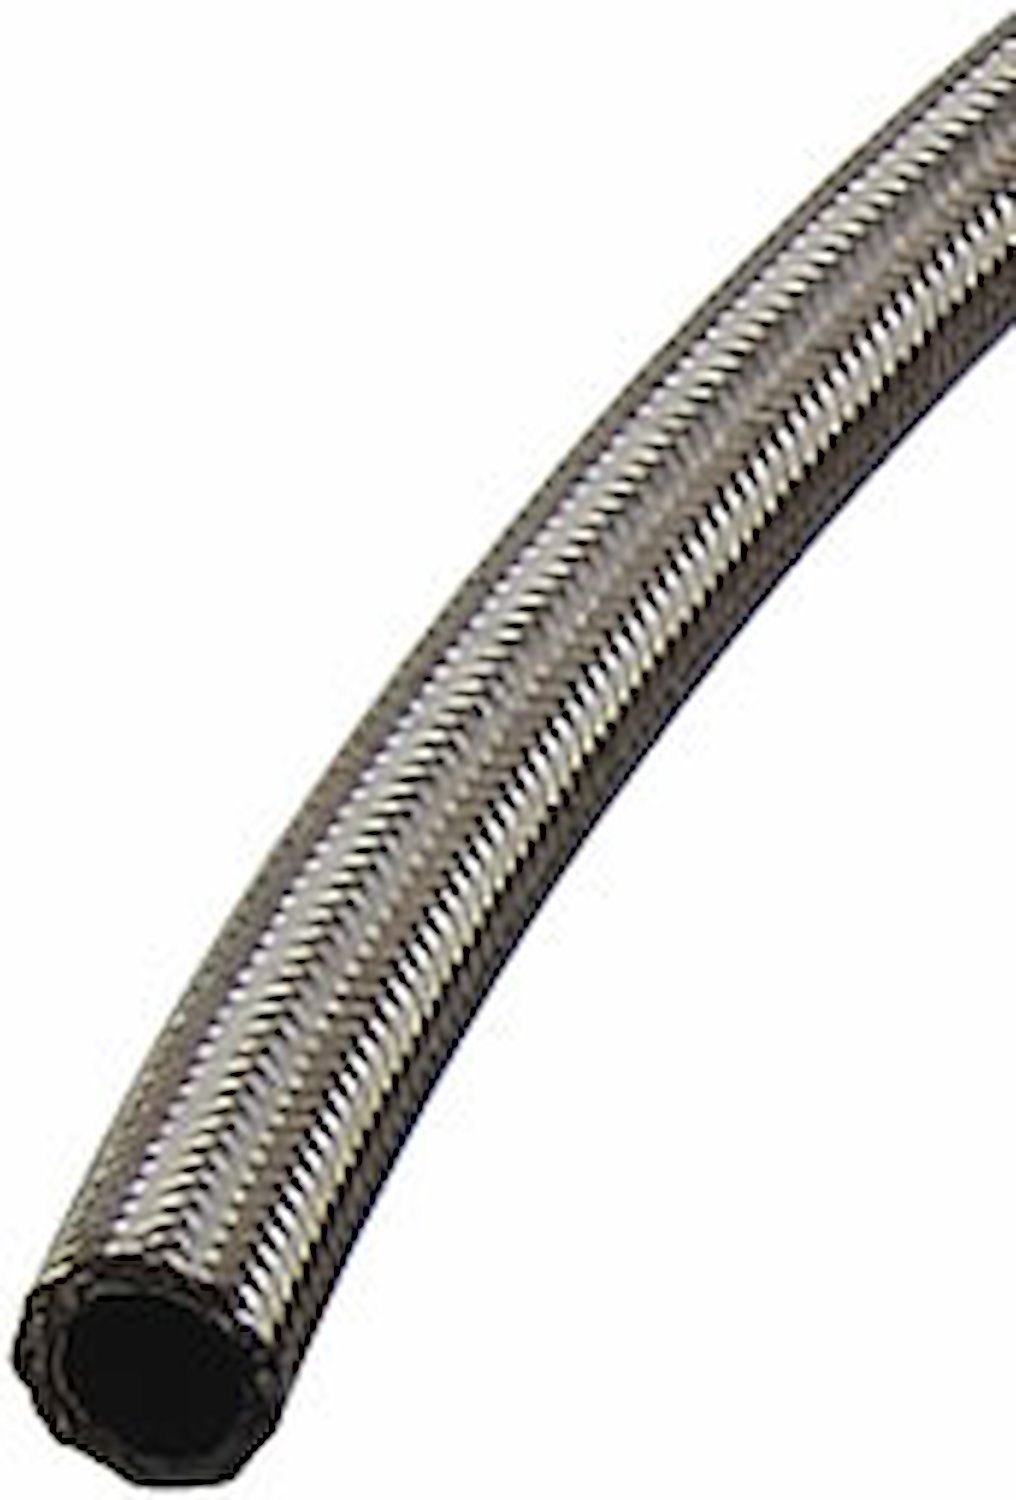 Pro-Flo 200 Series Stainless Steel Braided Hose -12 AN [3 ft.]